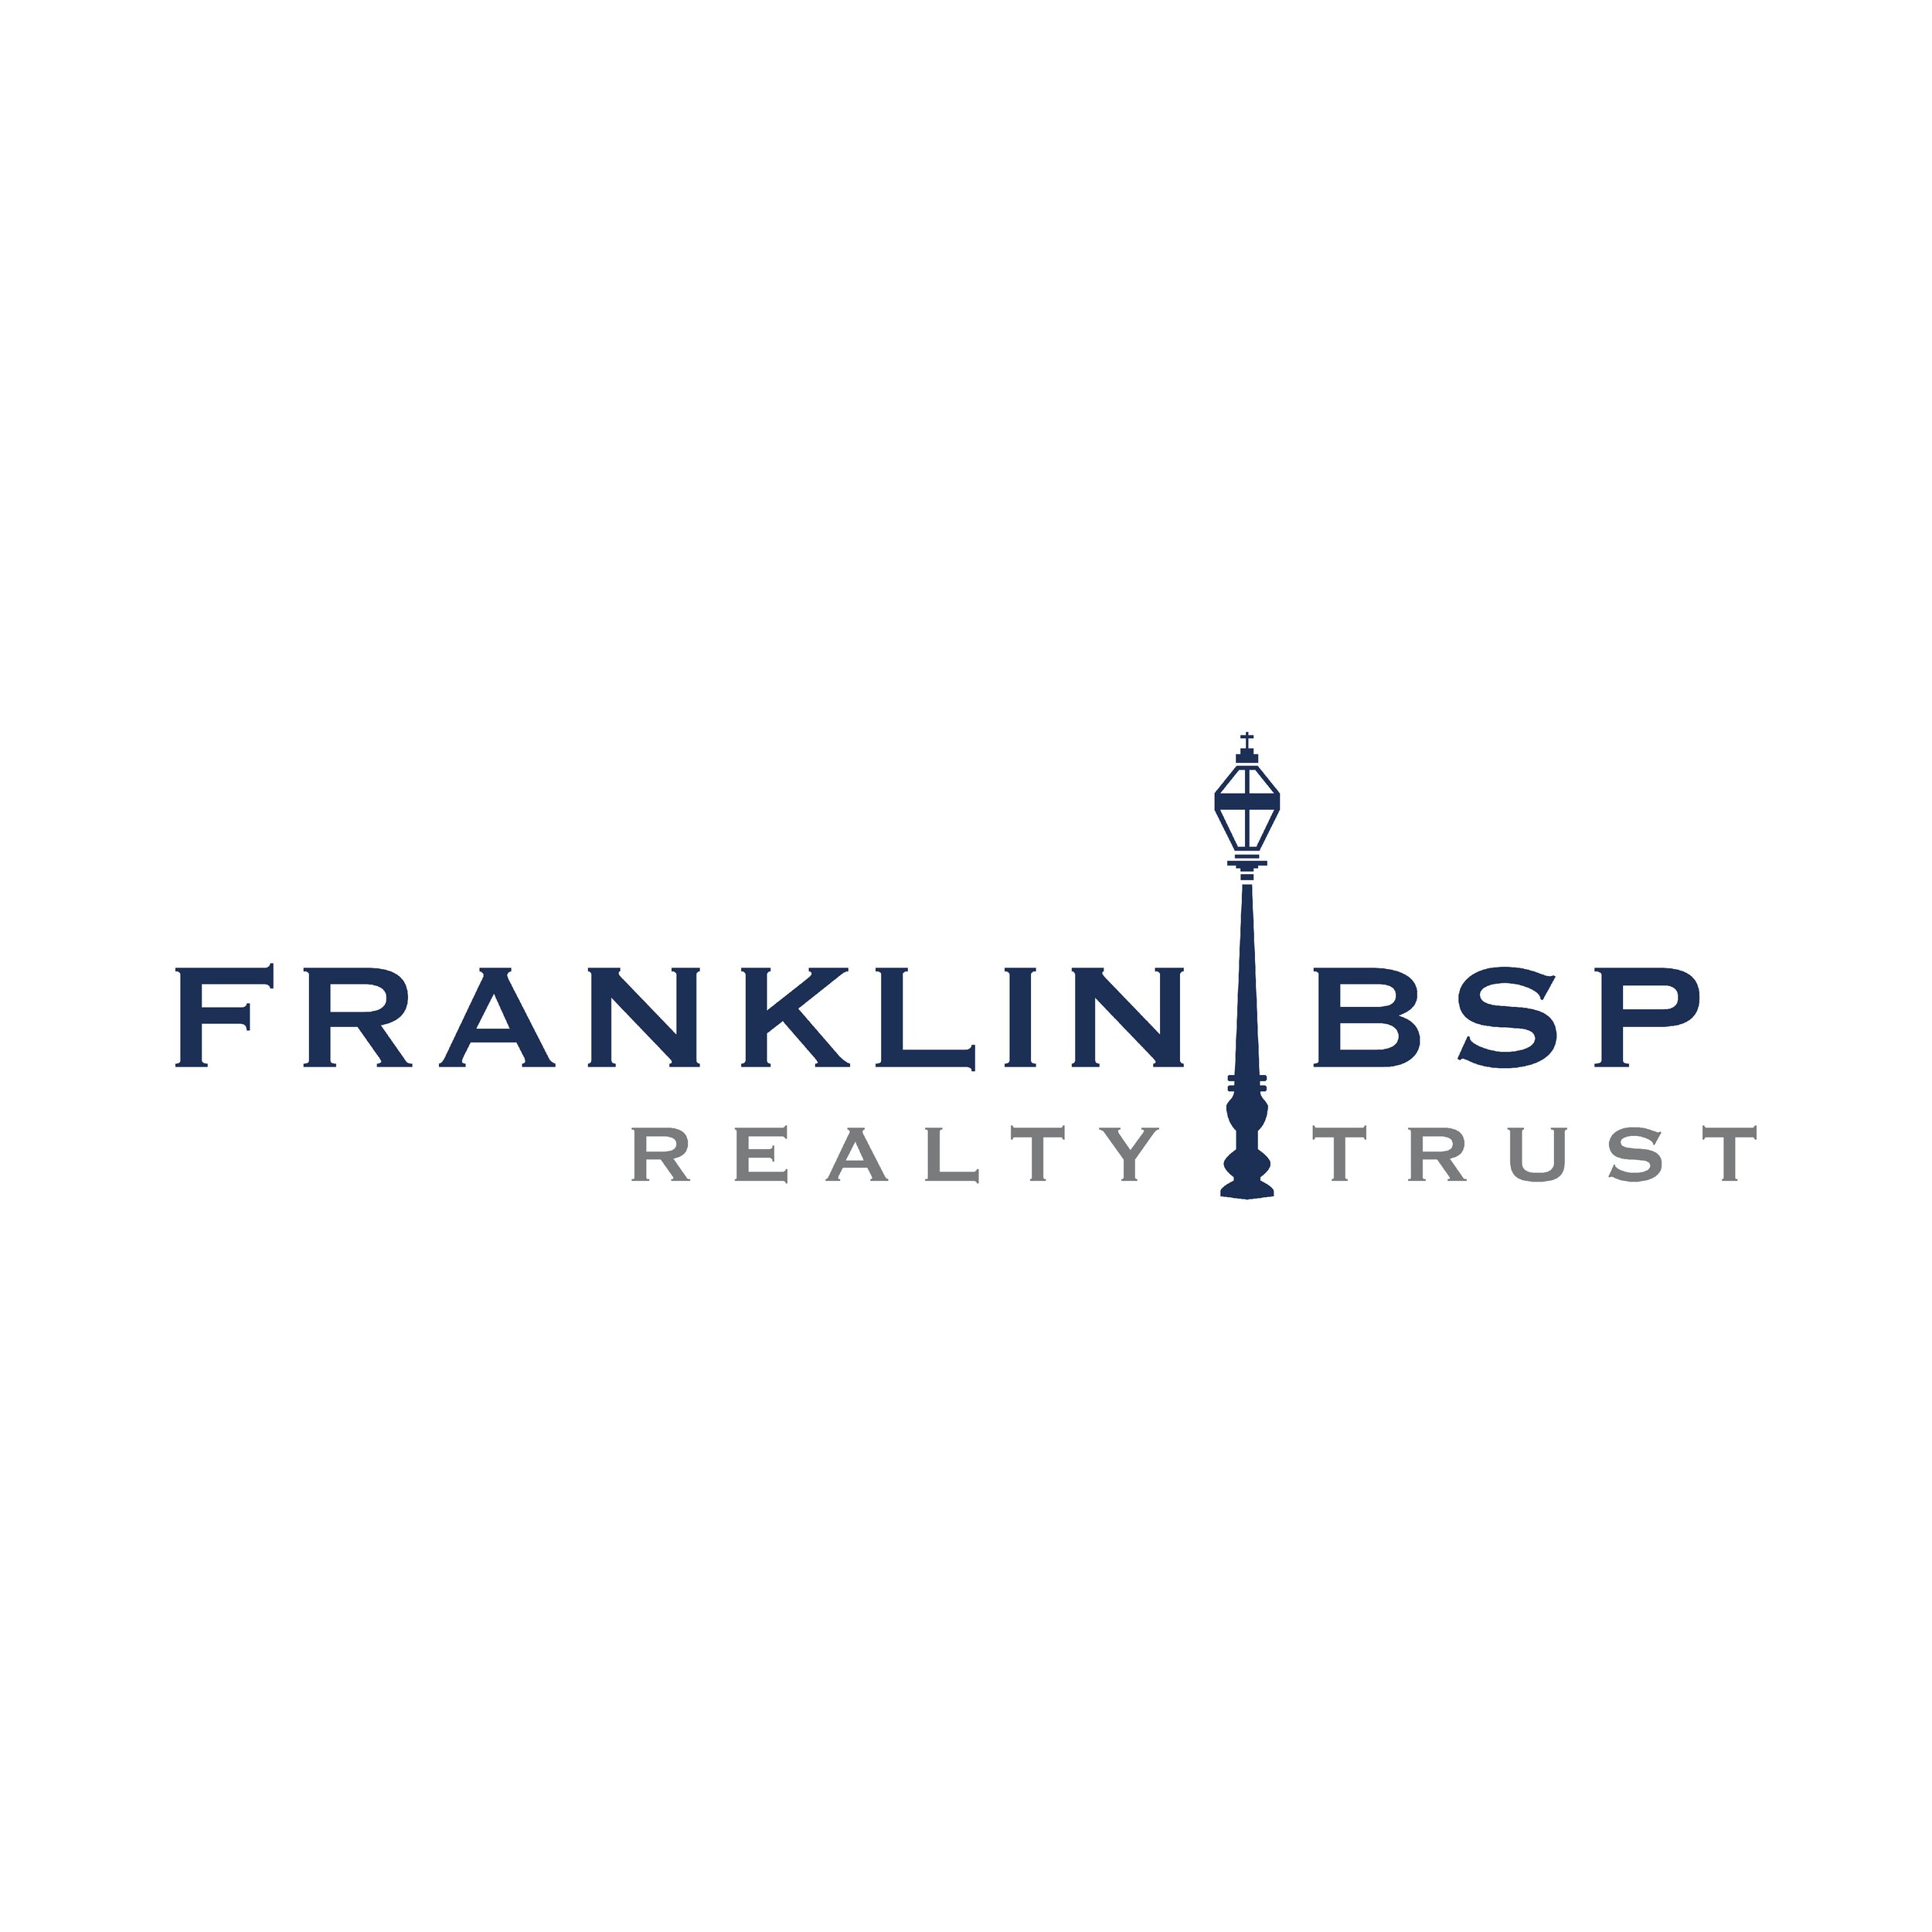 NYSE: FBRT | Franklin BSP Realty Trust, Inc. originates and manages a diversified portfolio of commercial real estate debt investments through a REIT structure.